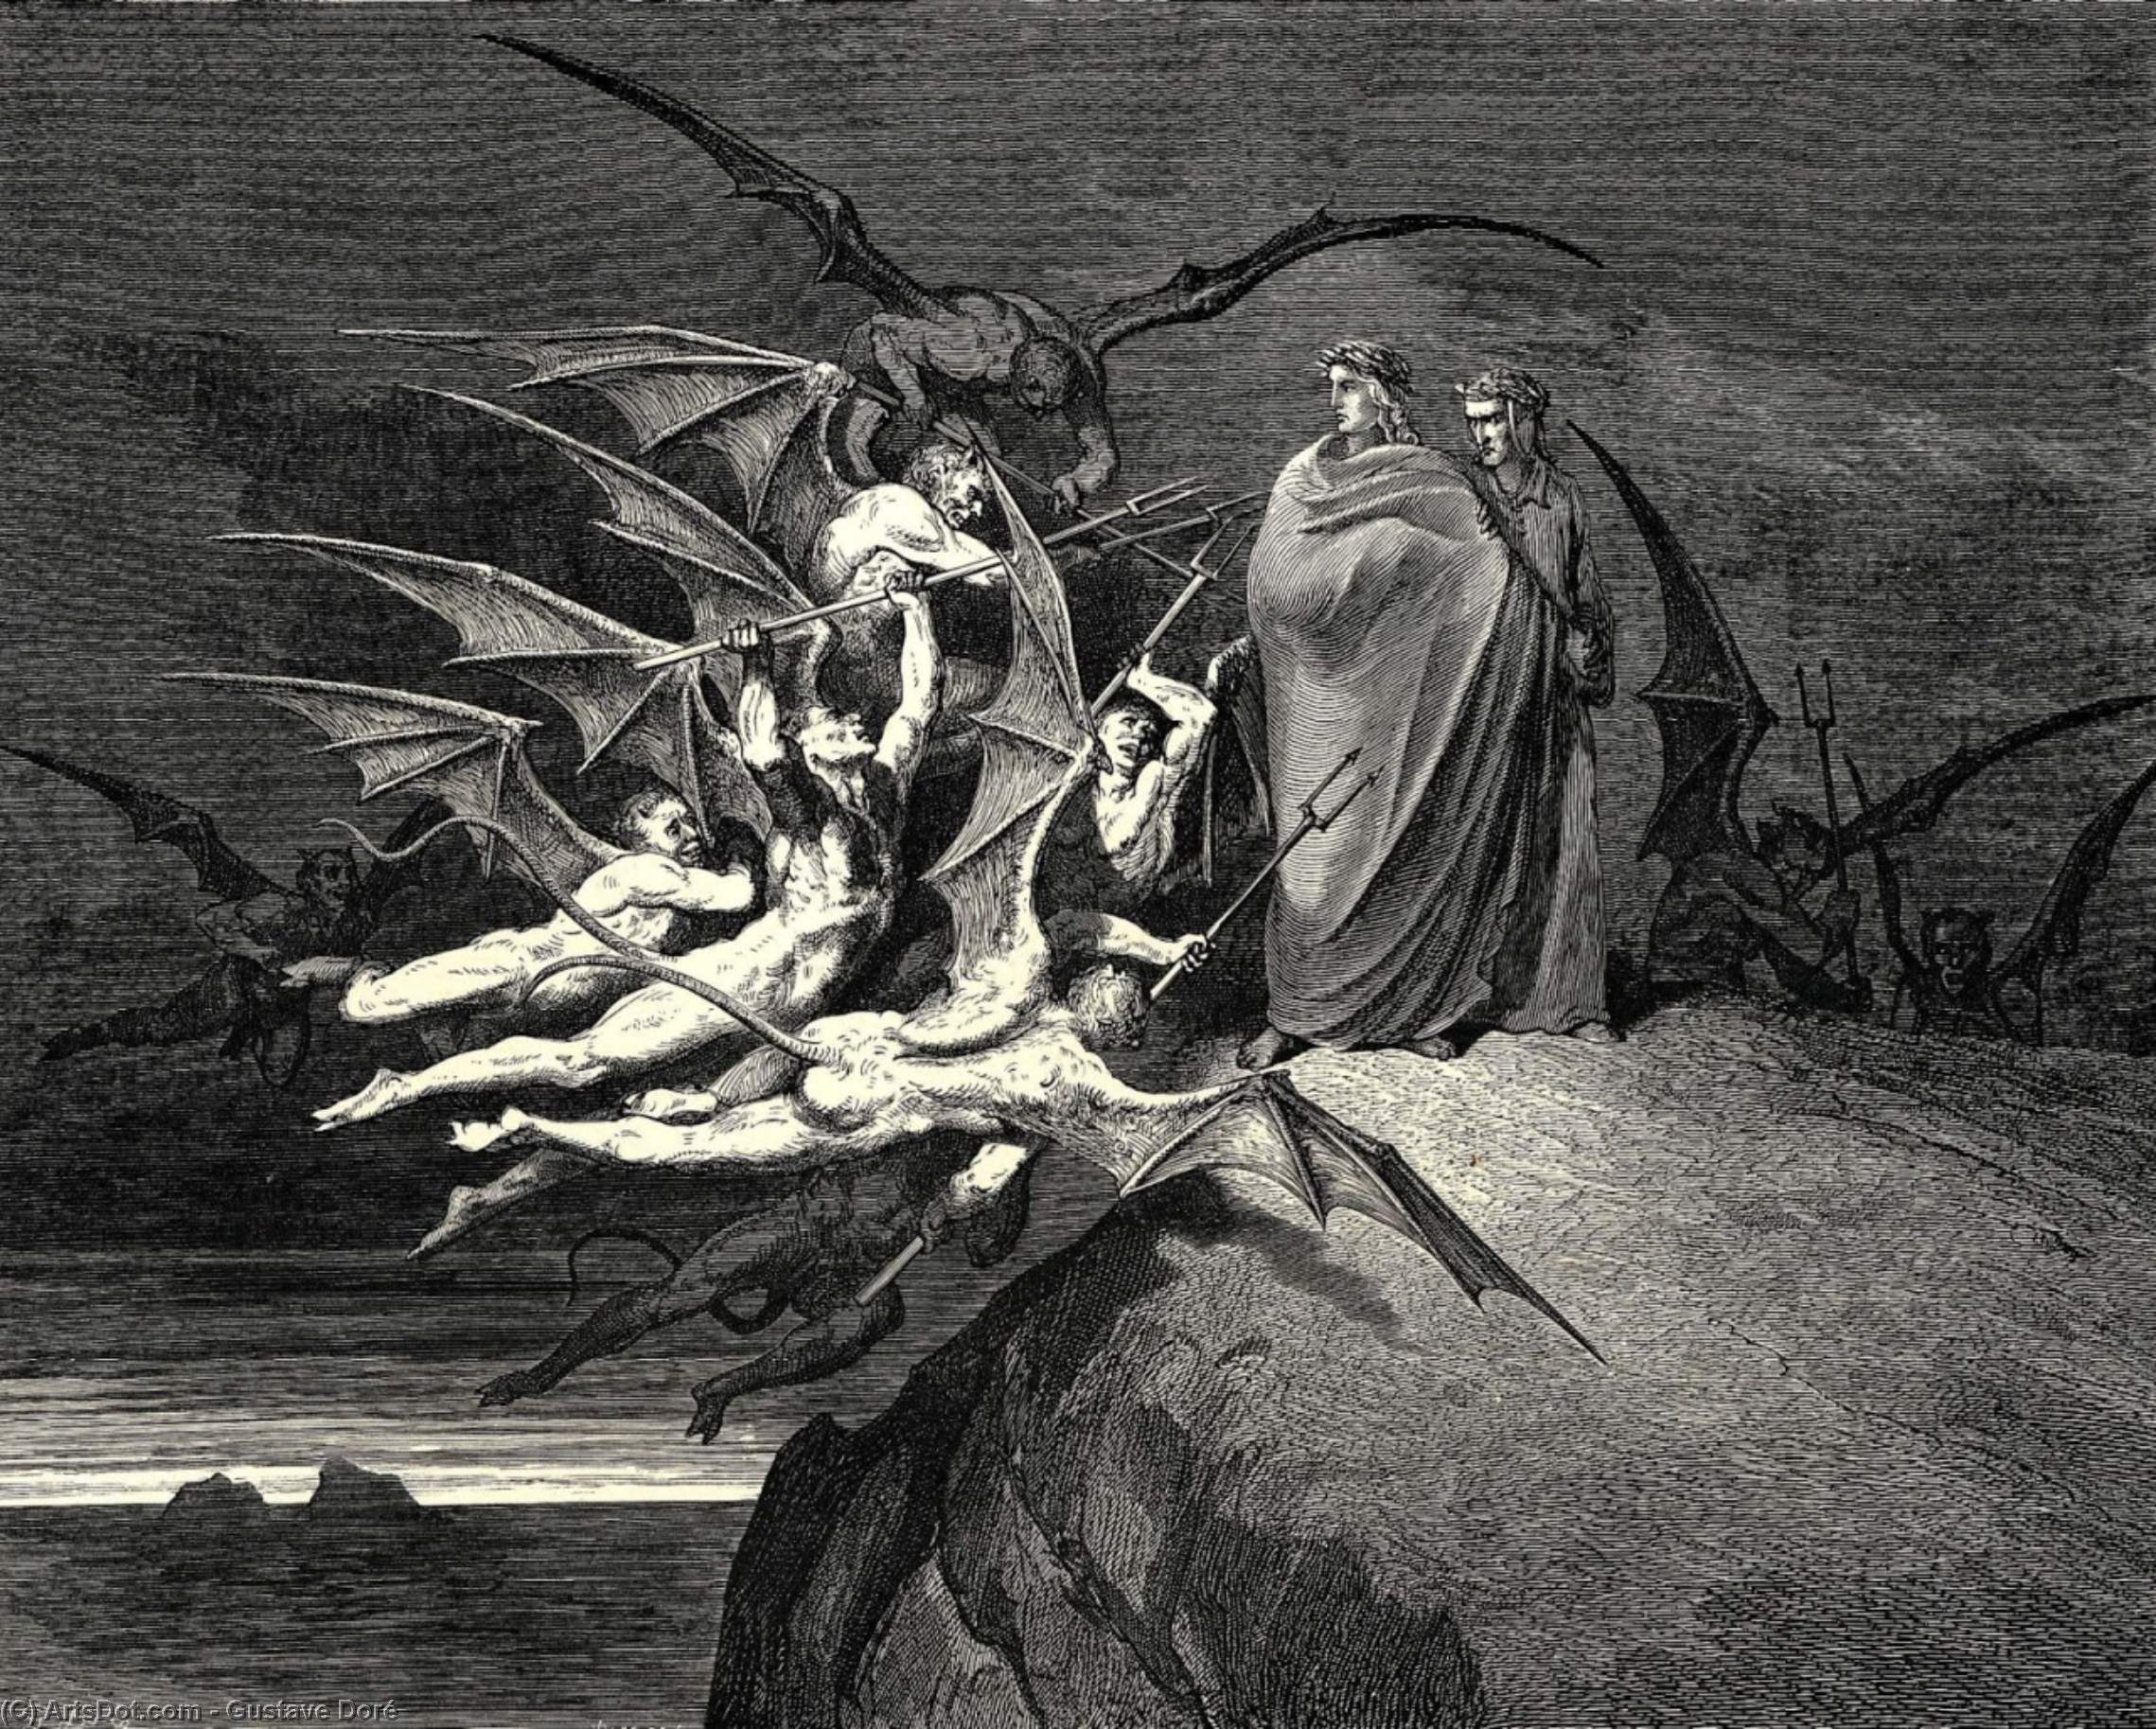 WikiOO.org - Encyclopedia of Fine Arts - Maleri, Artwork Paul Gustave Doré - The Inferno, Canto 21, line 70. “Be none of you outrageous.”